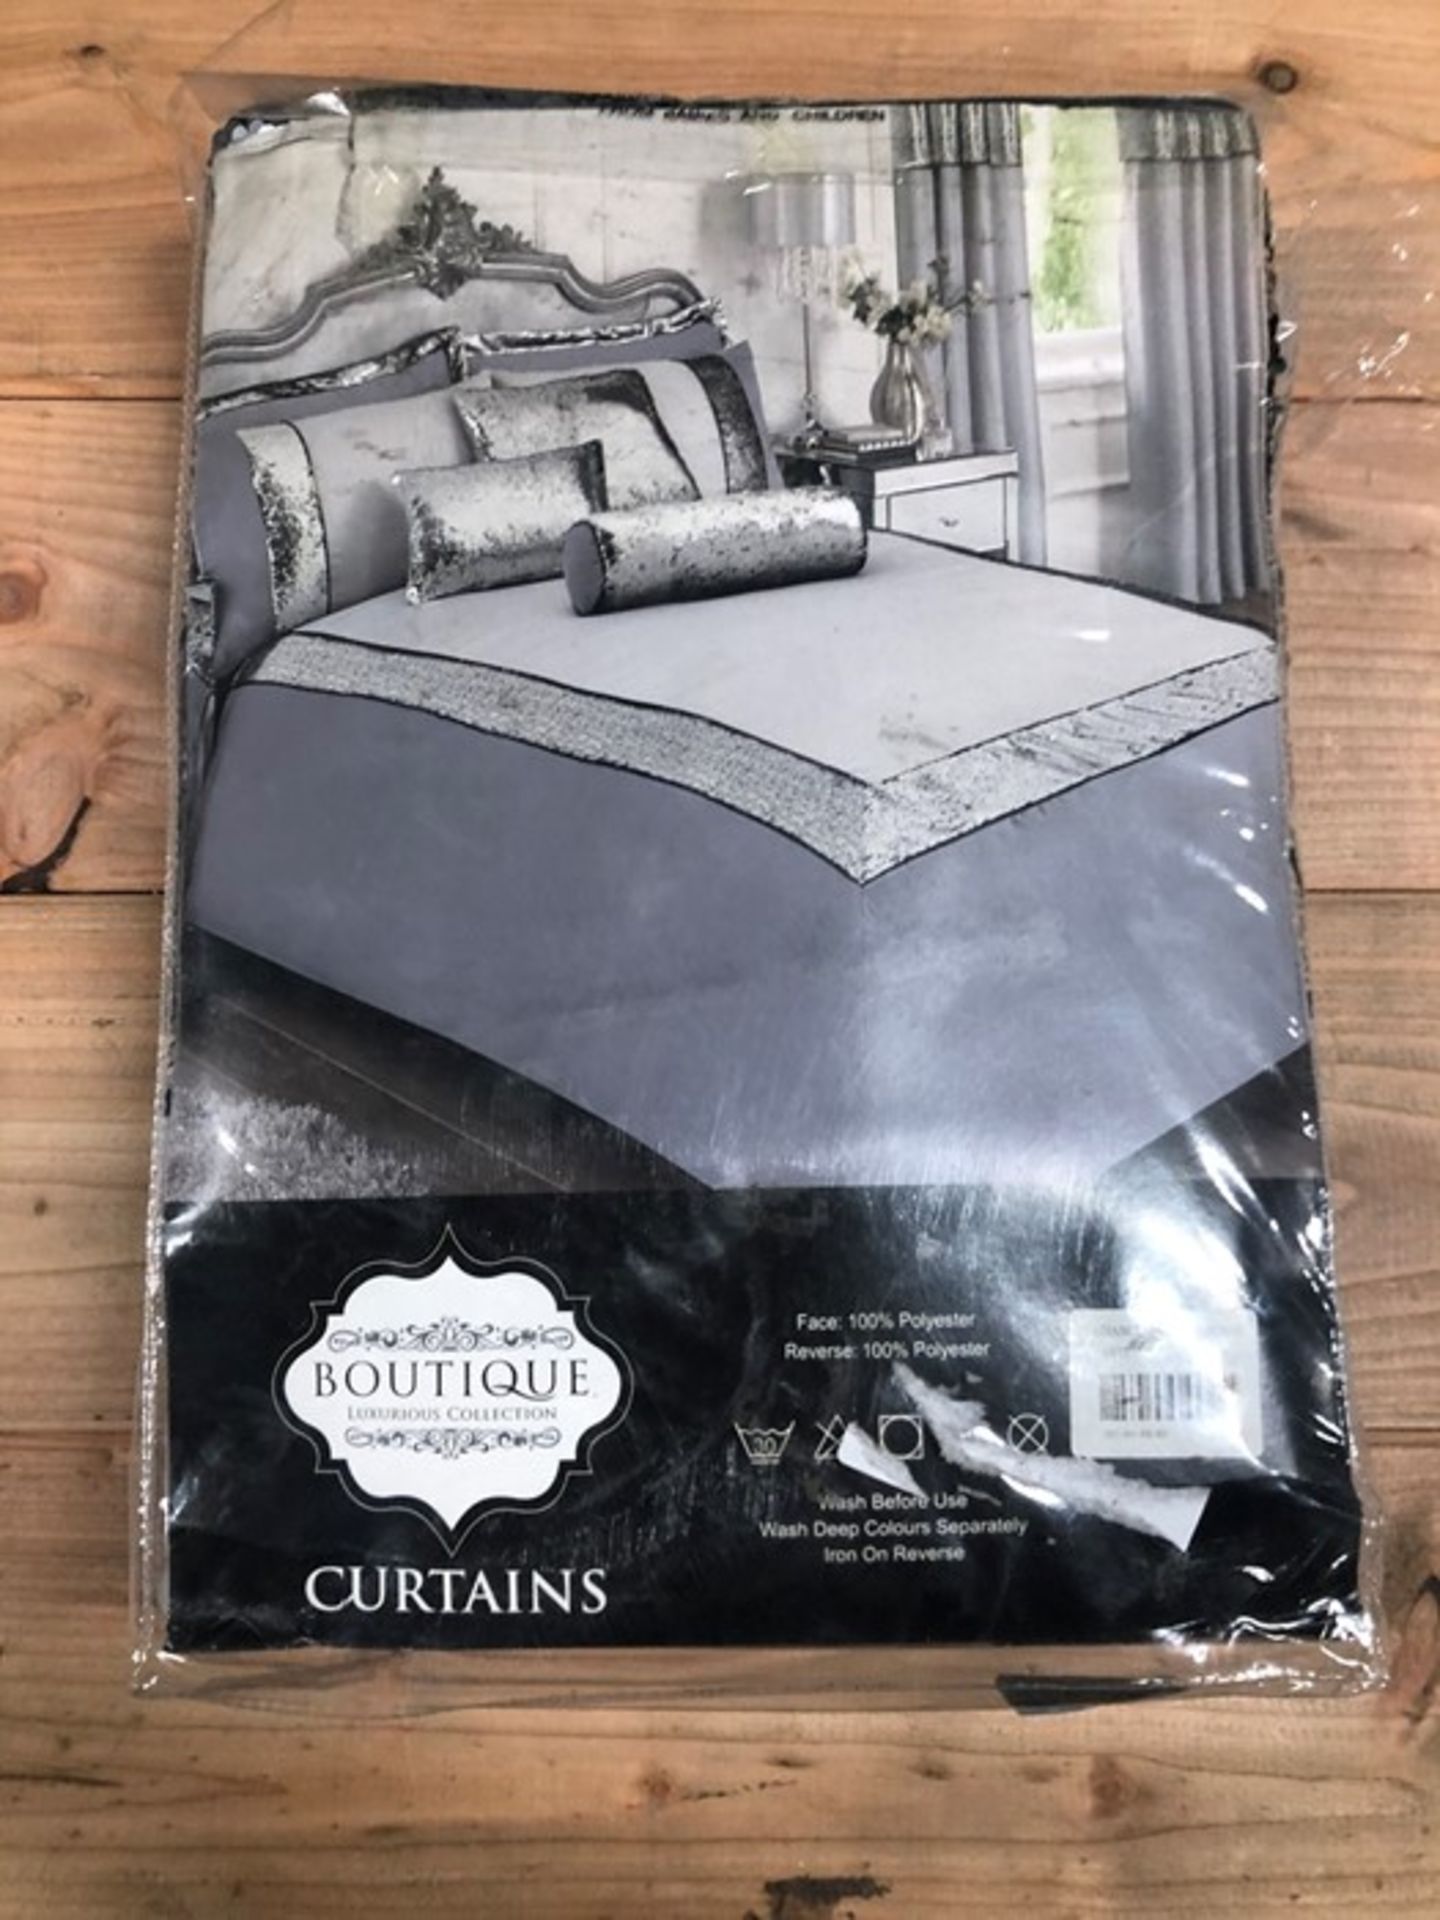 1 BAGGED PAIR OF RADIANCE SPARKLE LINED PENCIL PLEAT CURTAINS / 66 X 72" / RRP £99.99 (PUBLIC